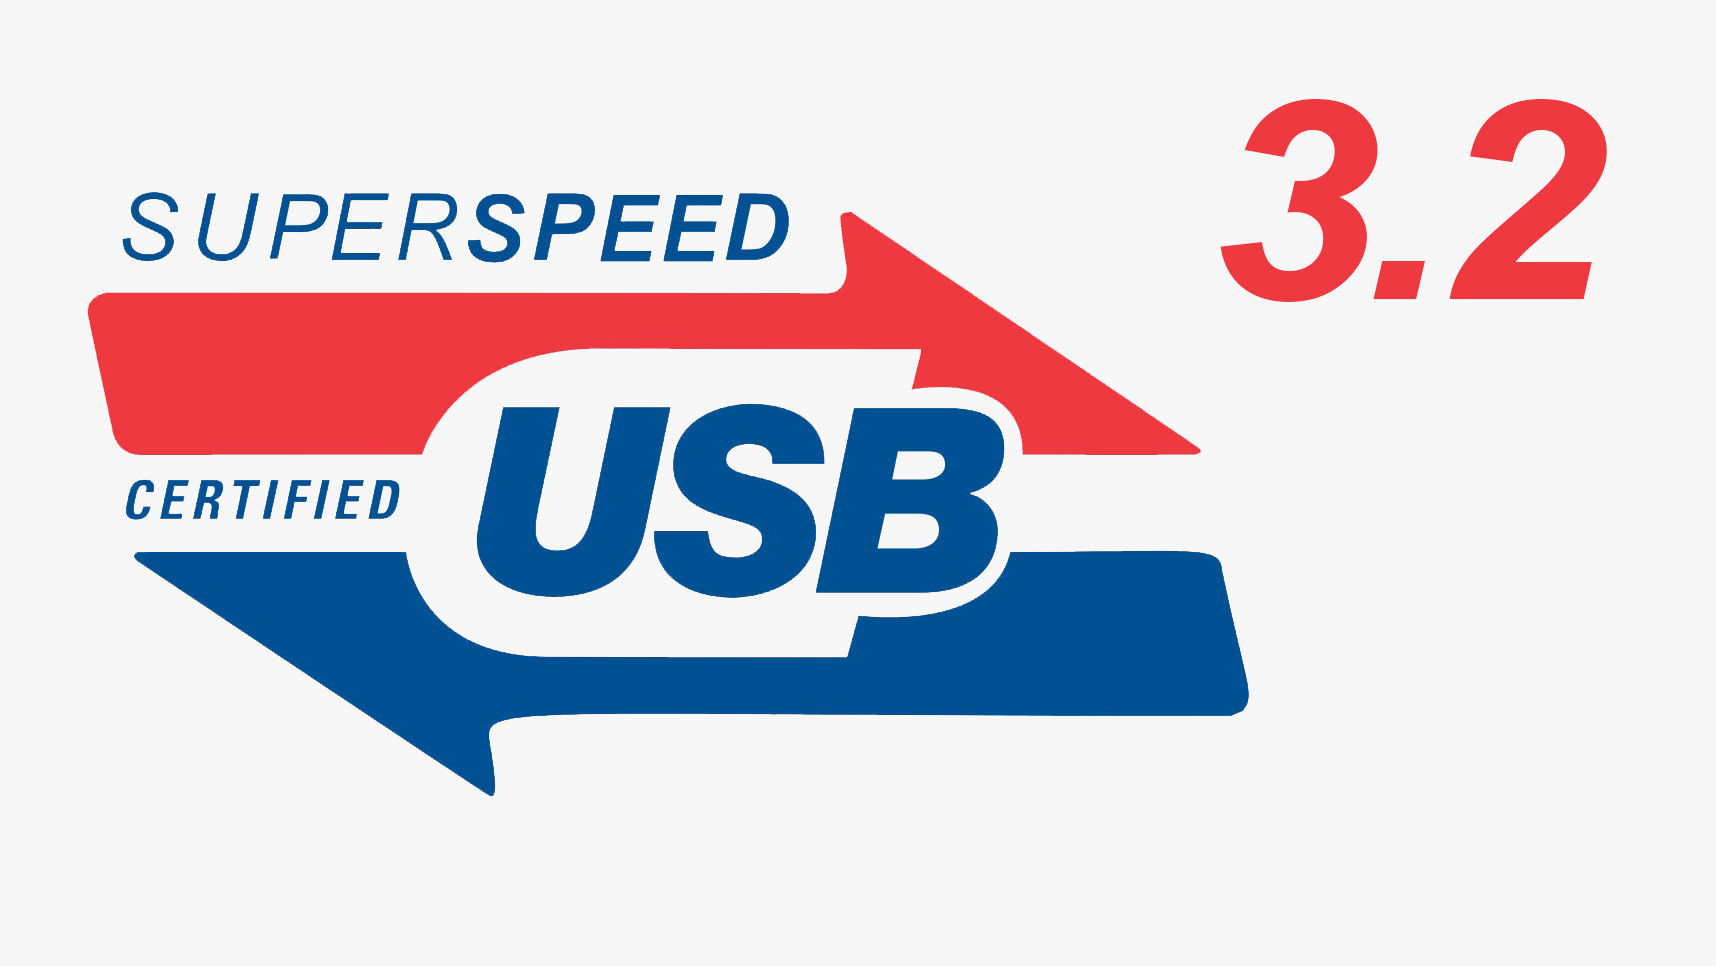 How Much Data Transfer Speed USB 3.2 will offer?